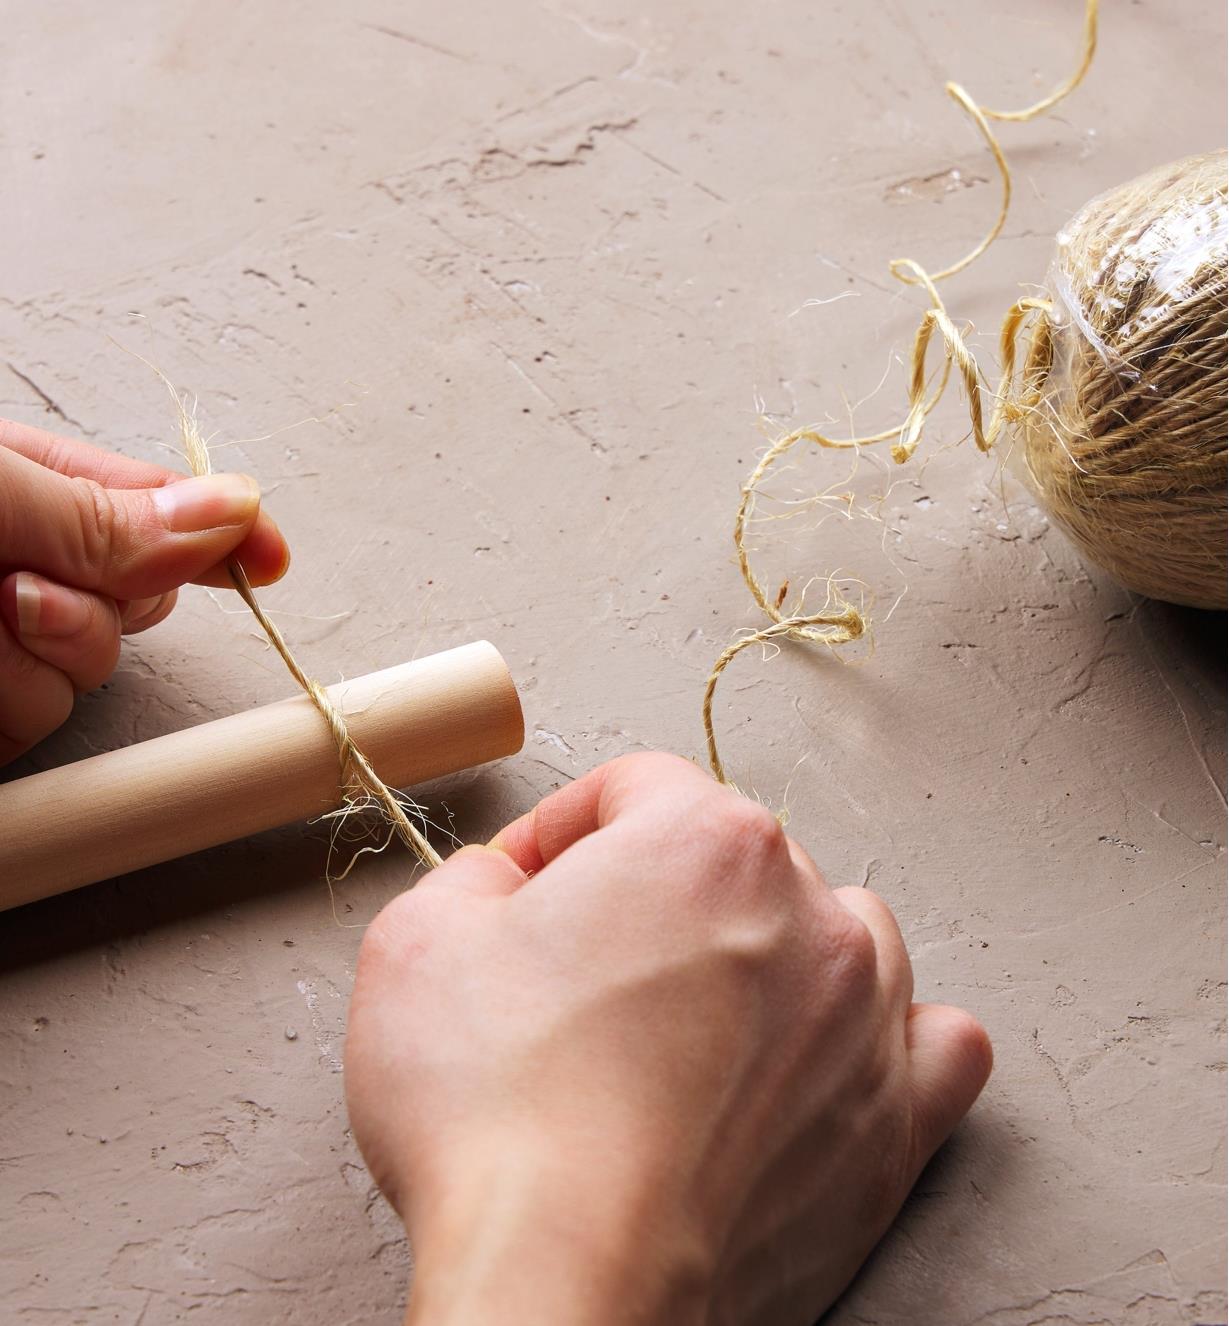 Making a herb drying rack with a piece of dowel and sisal twine